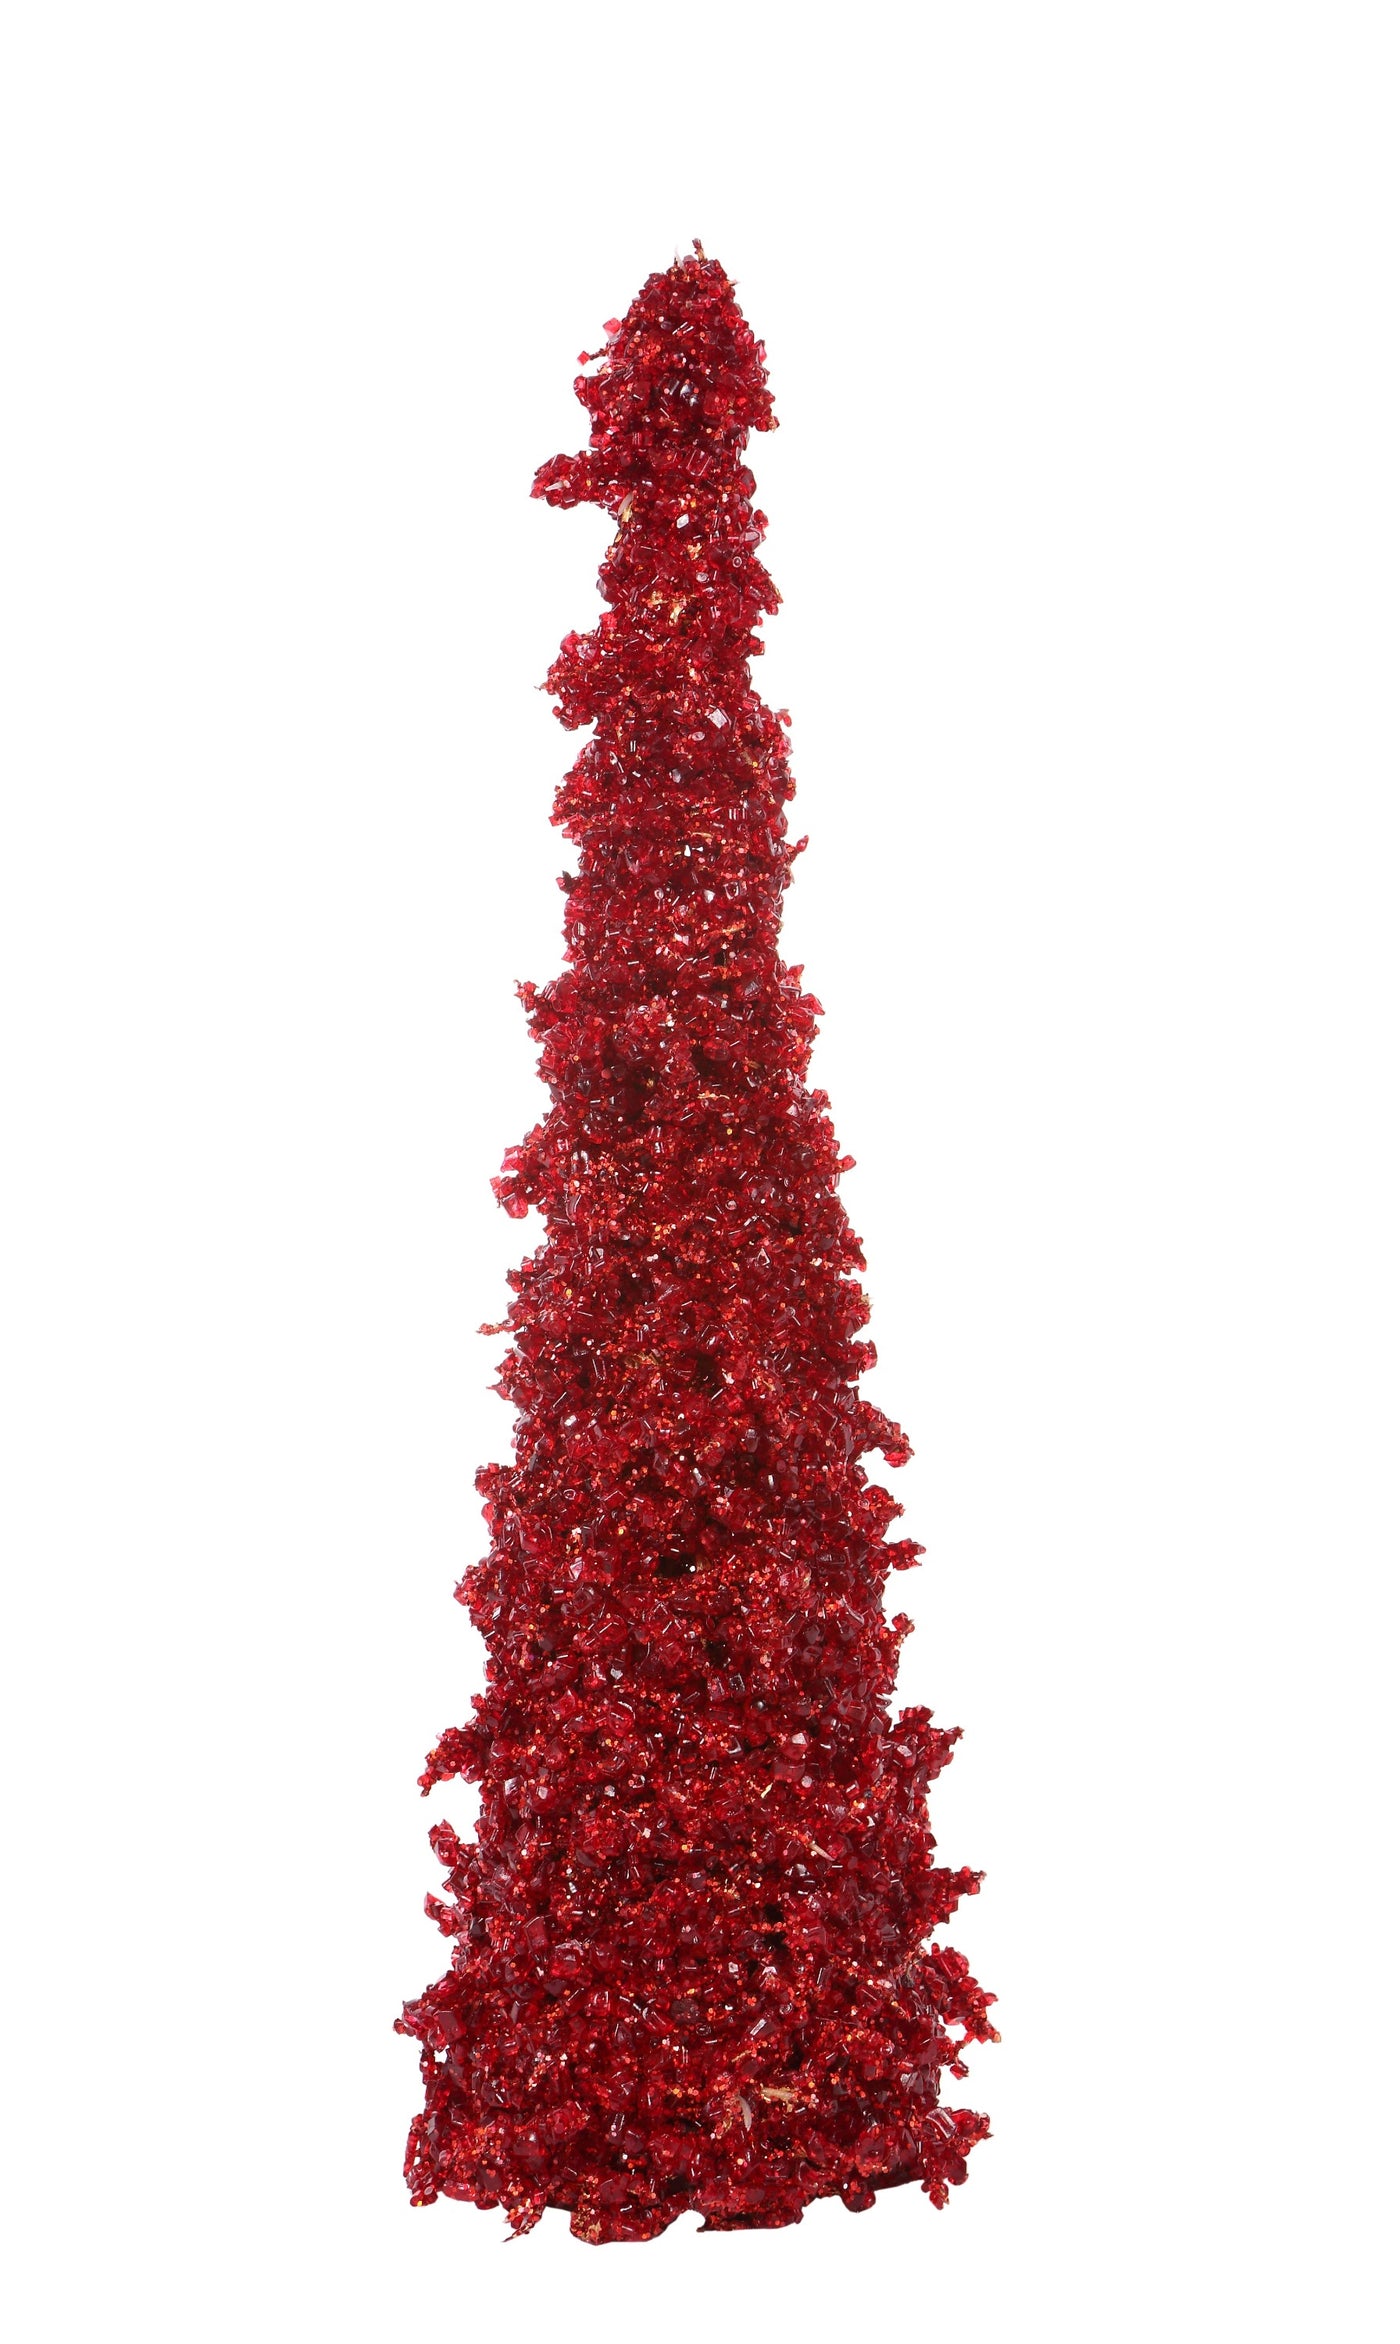 red Christmas cone holiday decor